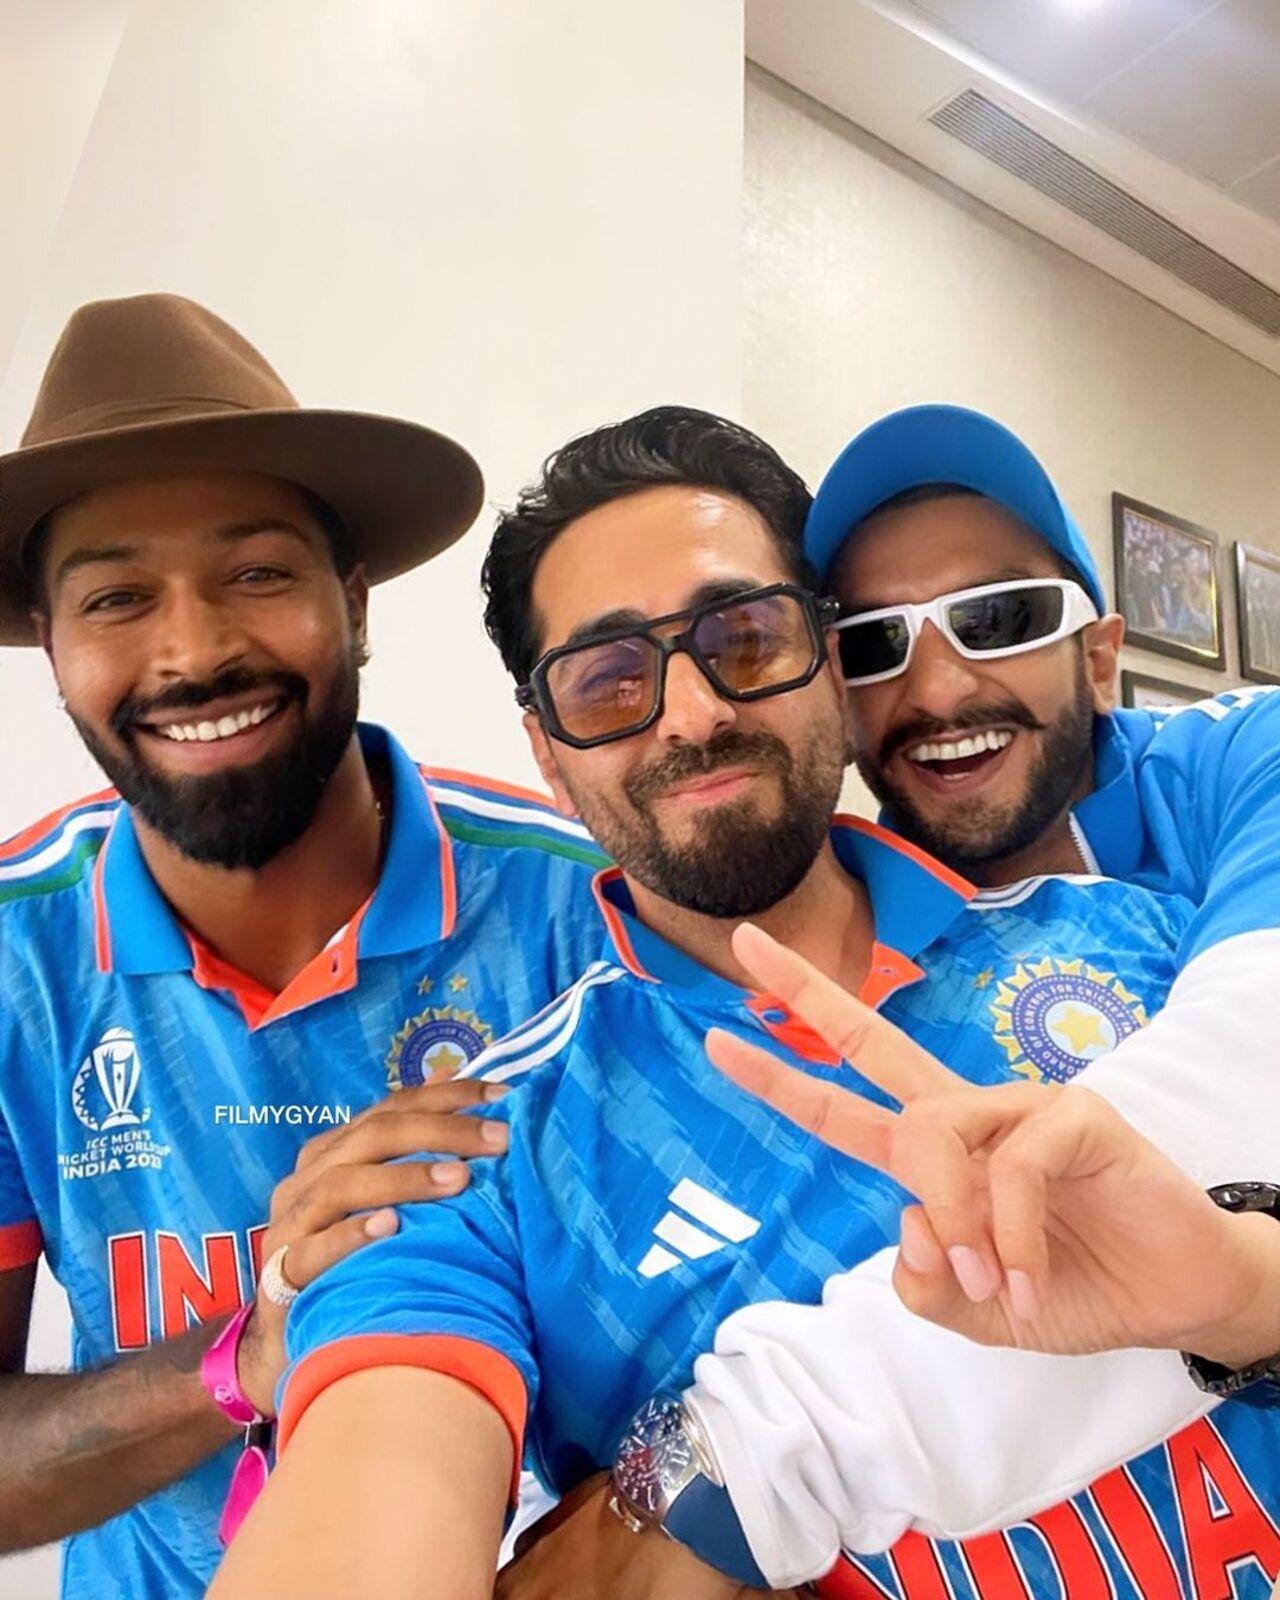 Ayushmann also shared a picture with Ranveer Singh and cricketer Hardik Pandya from the stadium. The trio caught up during the match